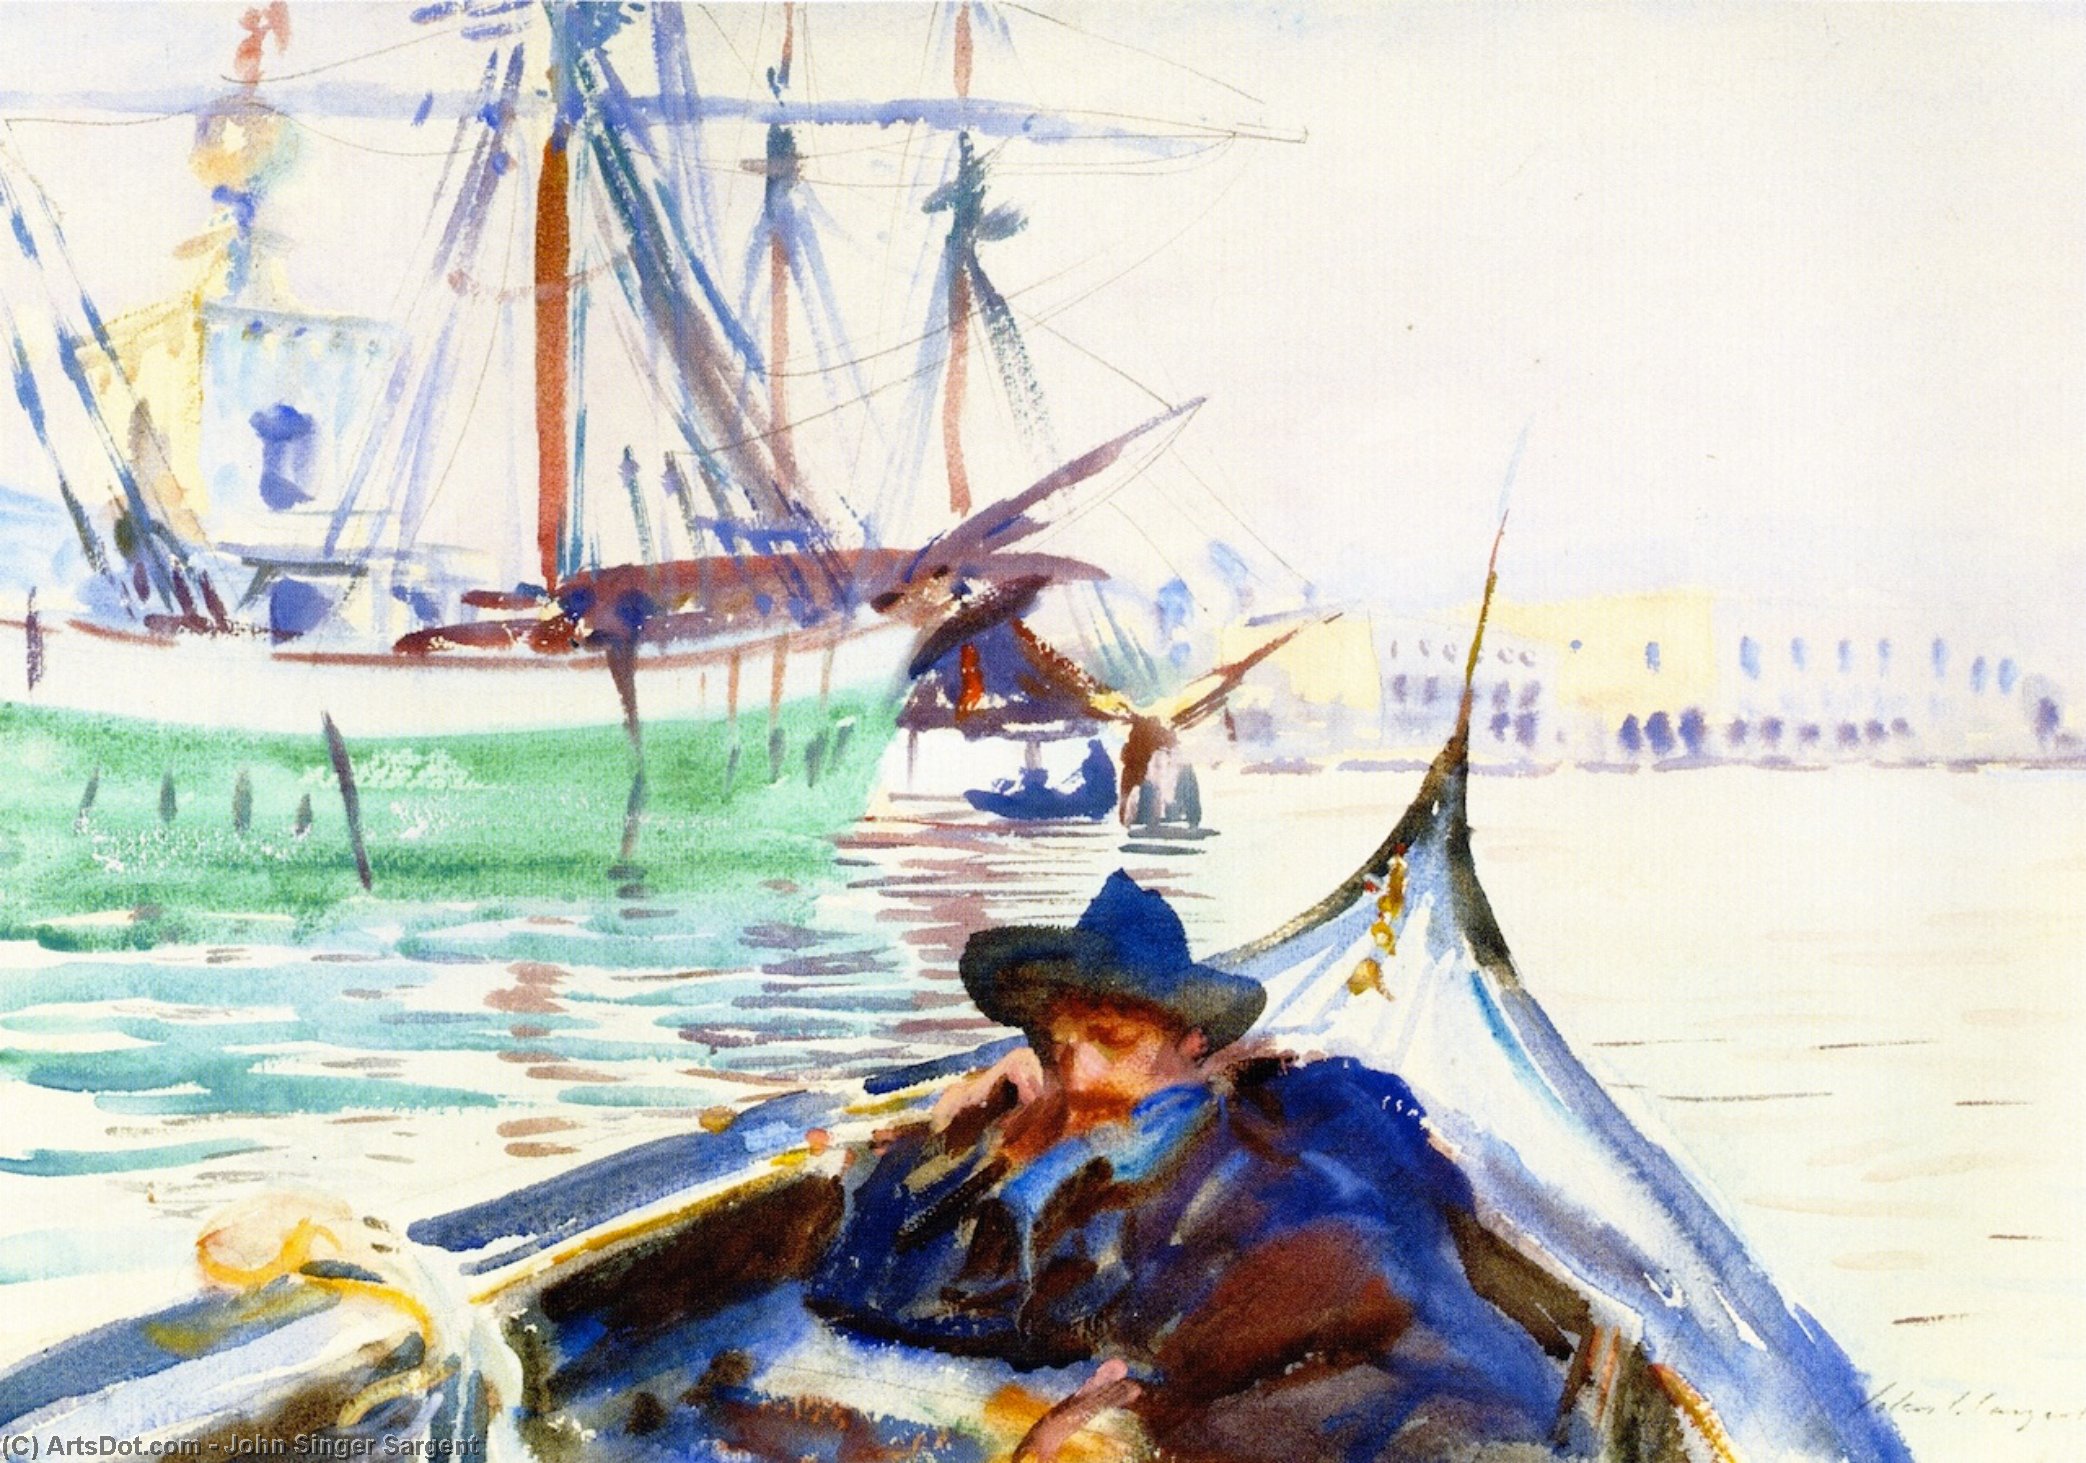 Buy Museum Art Reproductions A Summer Day on the Giudecca, Venice (also known as The Giudecca), 1907 by John Singer Sargent (1856-1925, Italy) | ArtsDot.com